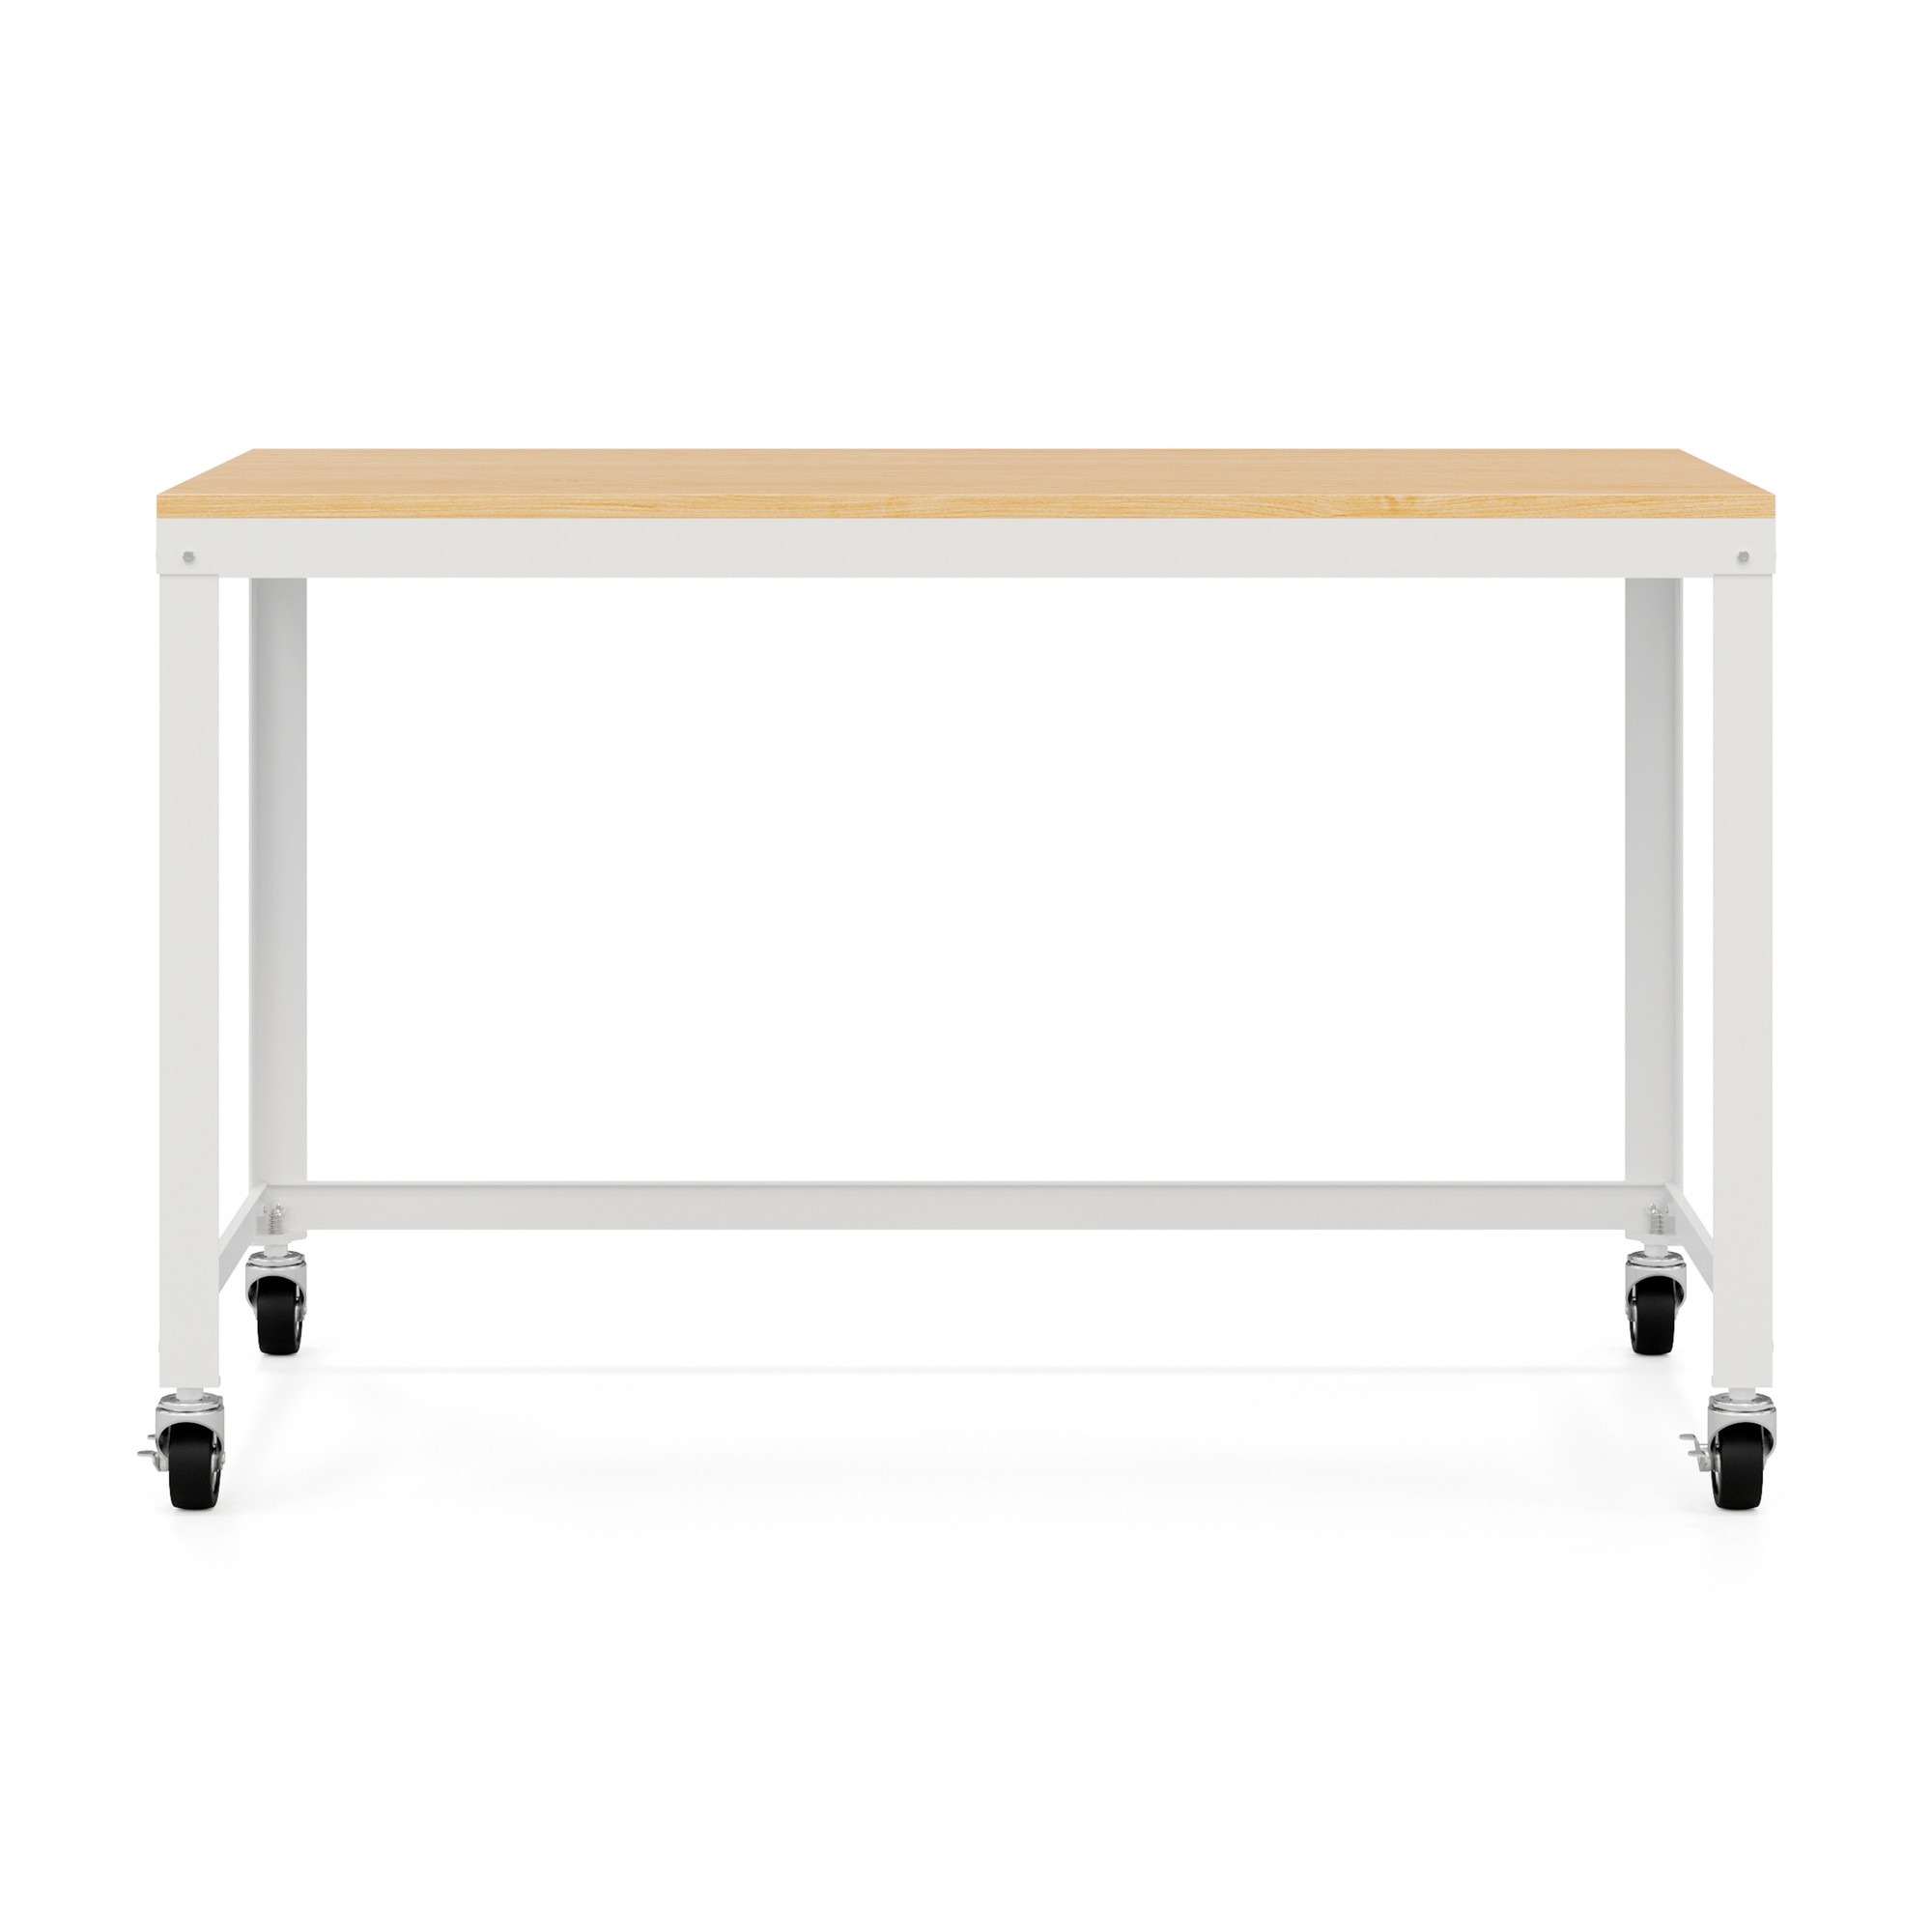 Hirsh Industries, Ready-To-Assemble 48Inch Mobile Desk w/ Laminate Top, Width 47.45 in, Height 30 in, Depth 23.88 in, Model 24973